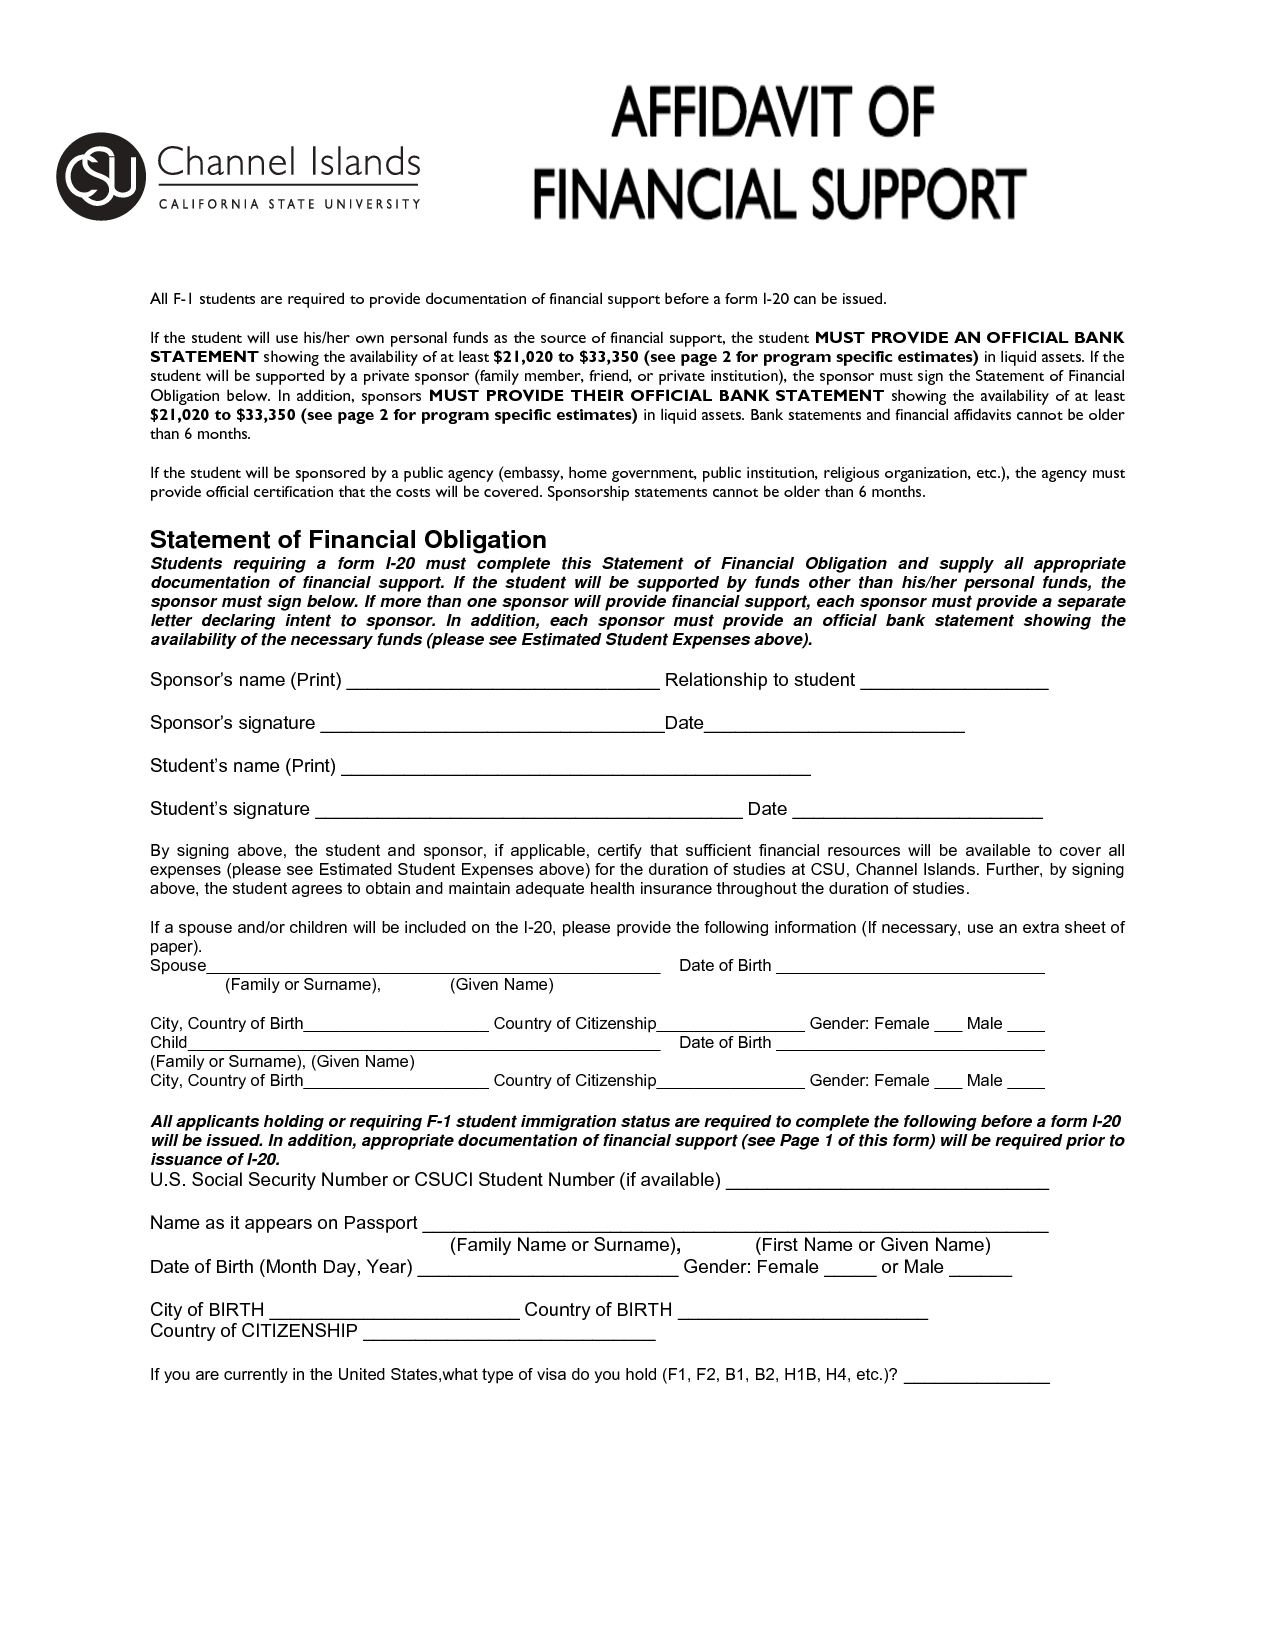 affidavit of support template letter example-Search Results Affidavit of Financial Support Letter affidavit of support sample 3-b